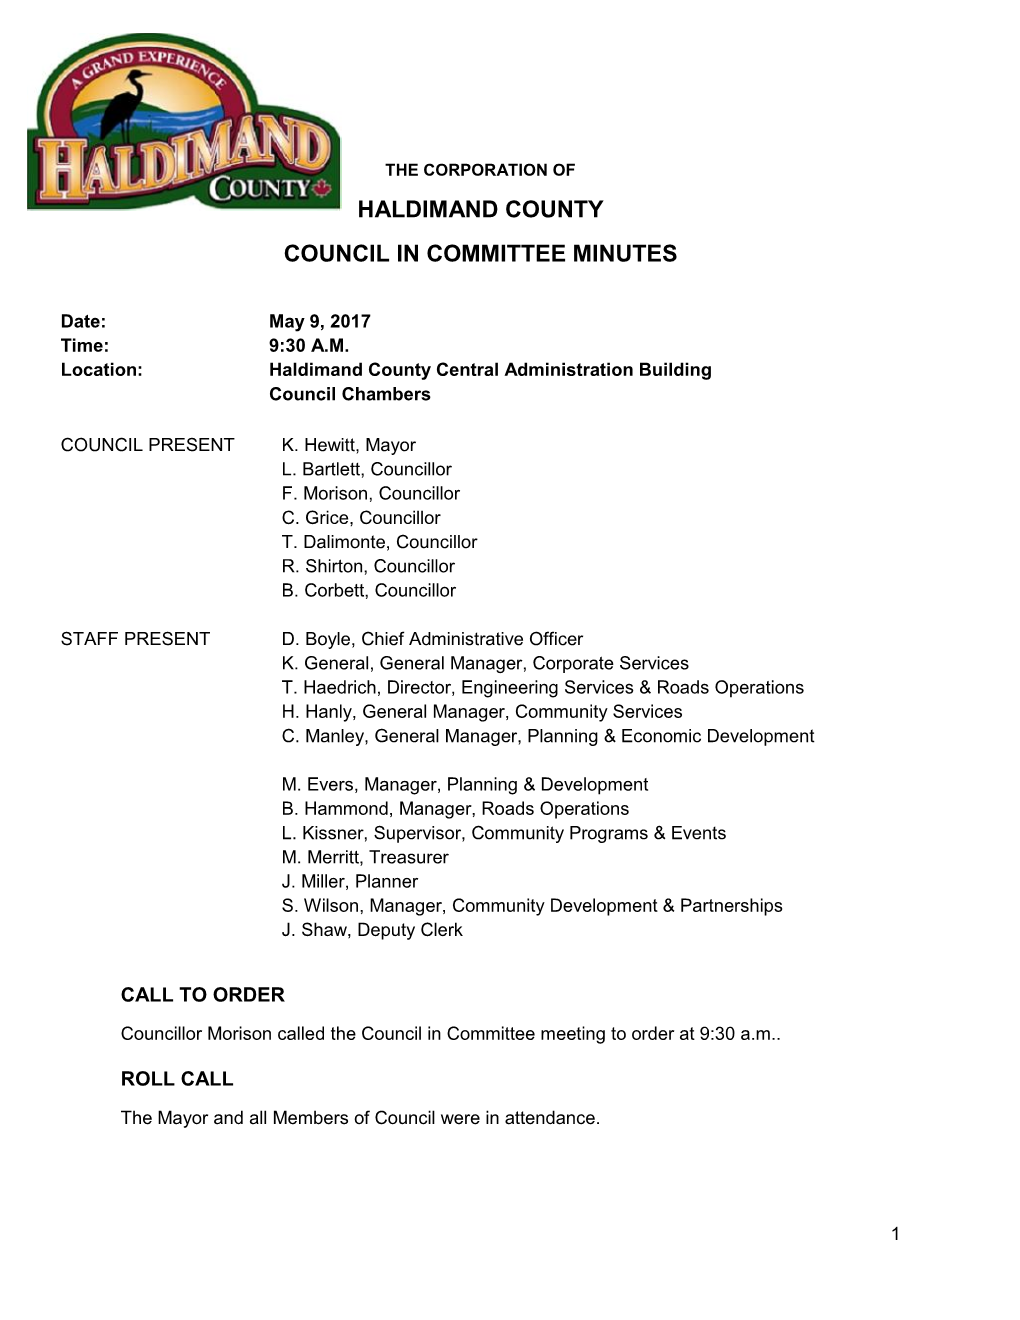 Haldimand County Council in Committee Minutes